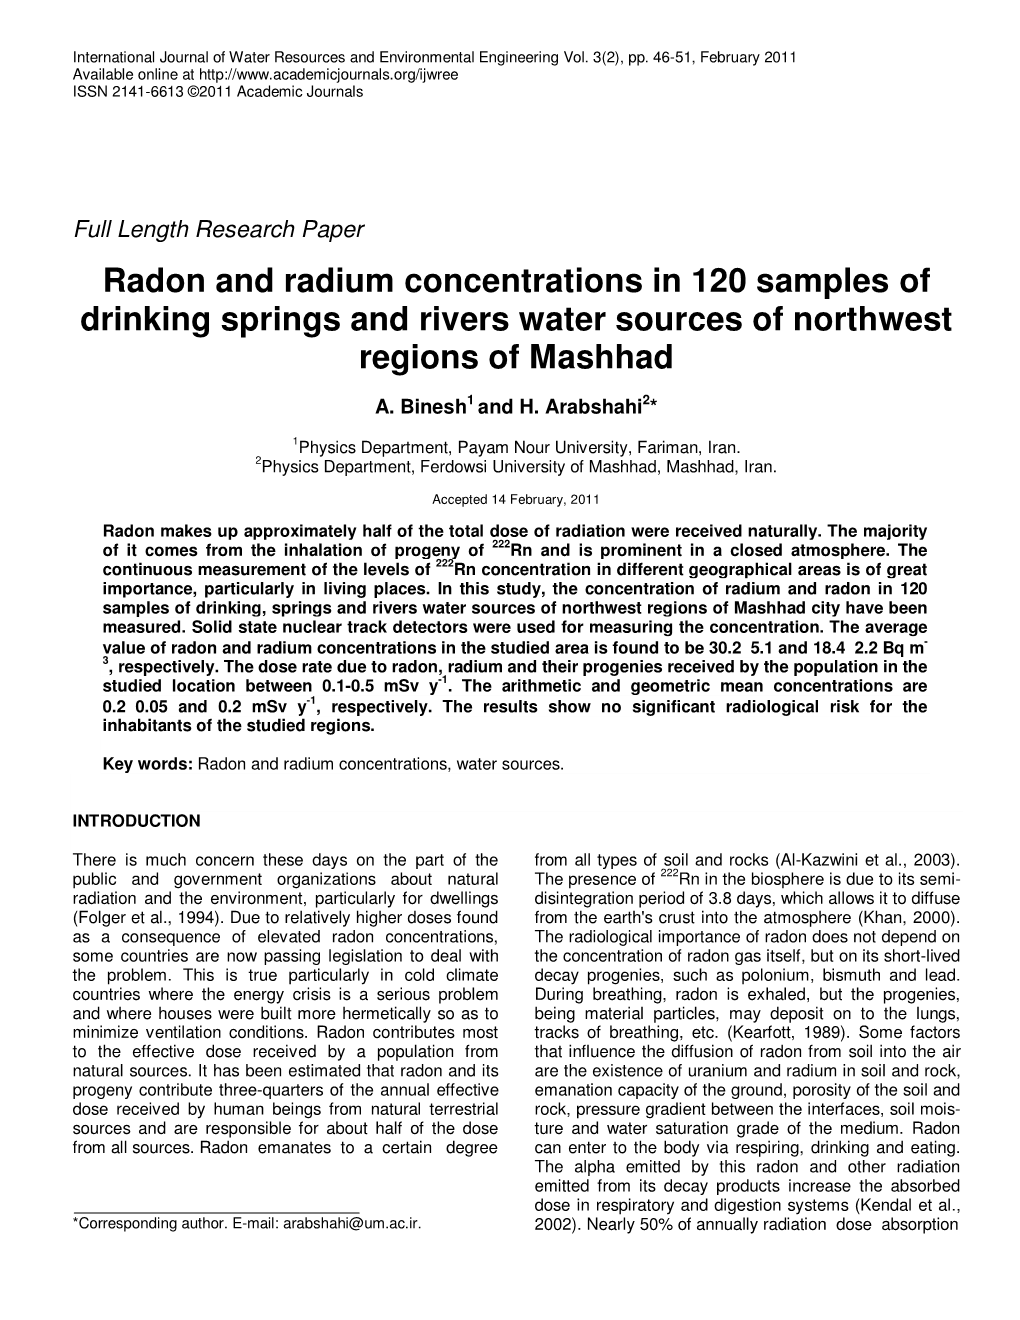 Radon and Radium Concentrations in 120 Samples of Drinking Springs and Rivers Water Sources of Northwest Regions of Mashhad